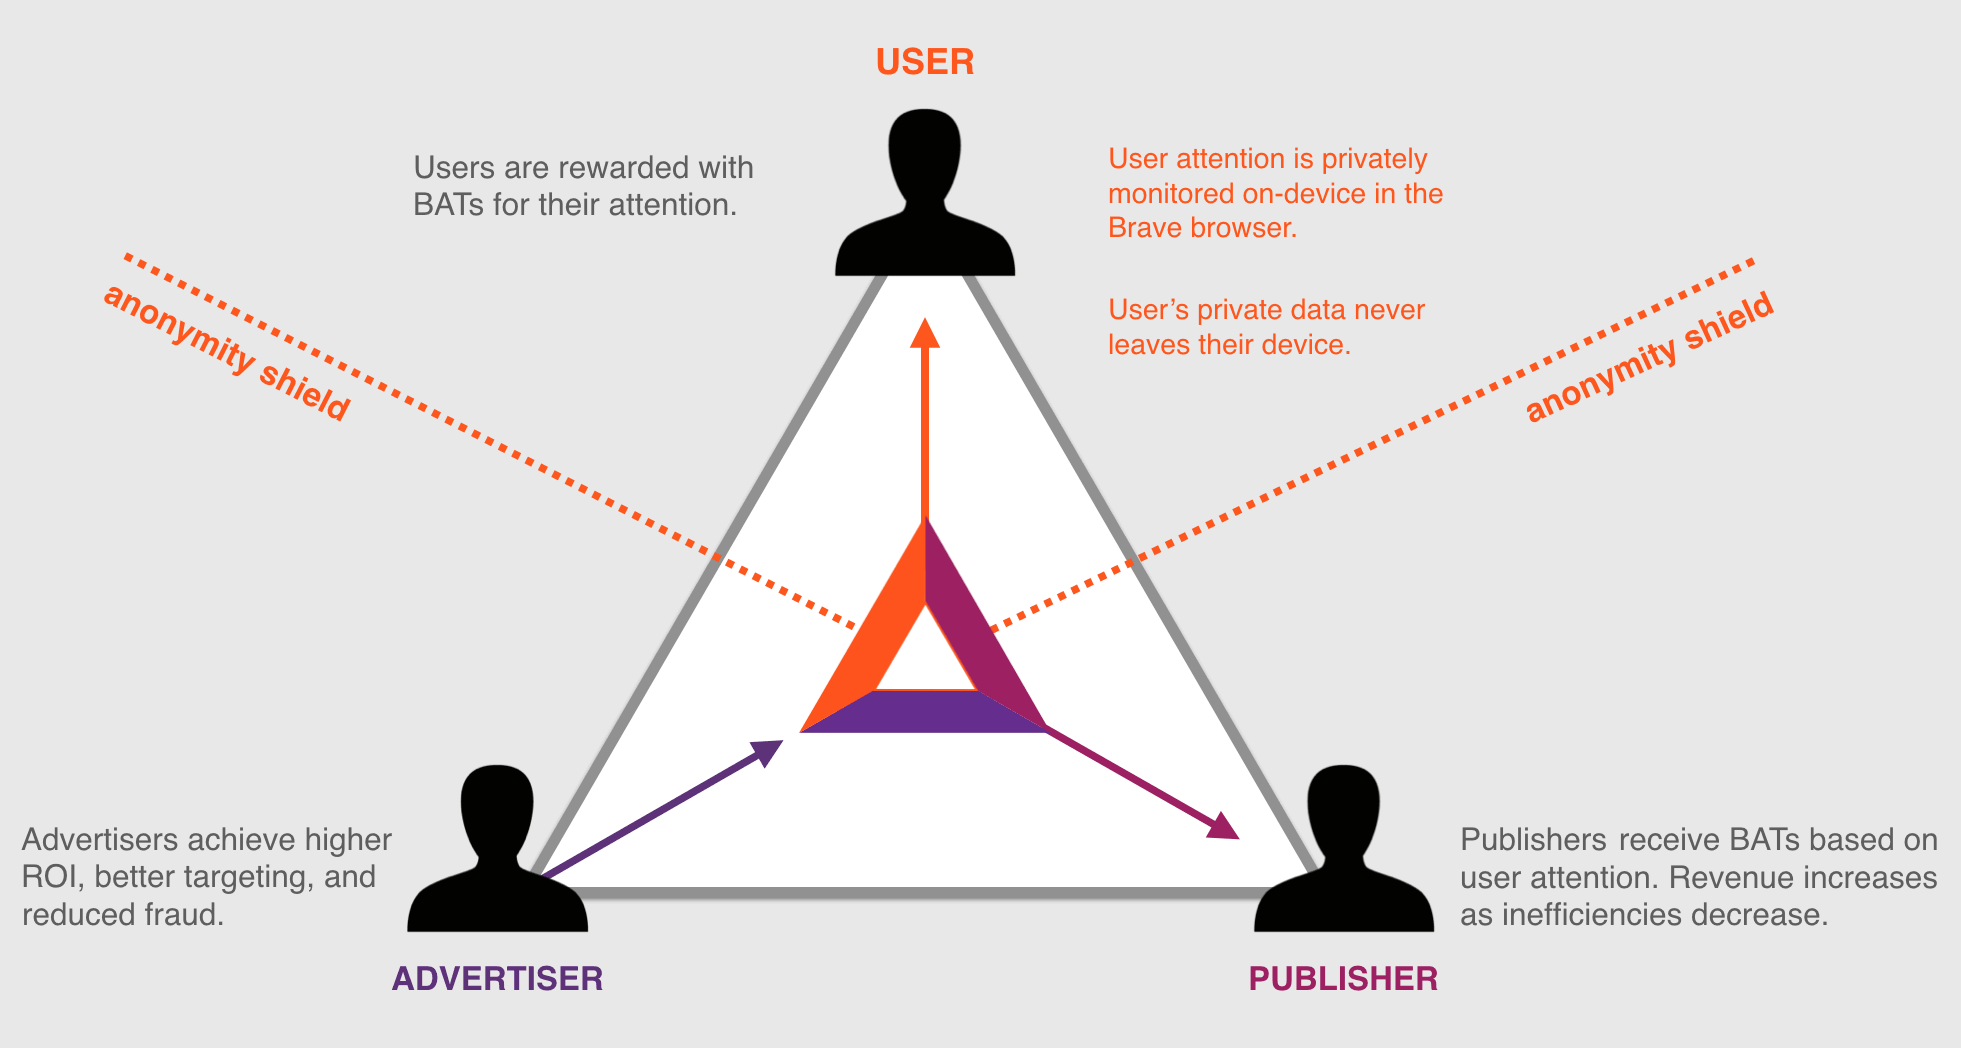 The user/publisher/advertiser payment model on which BAT is based. From https://basicattentiontoken.org/